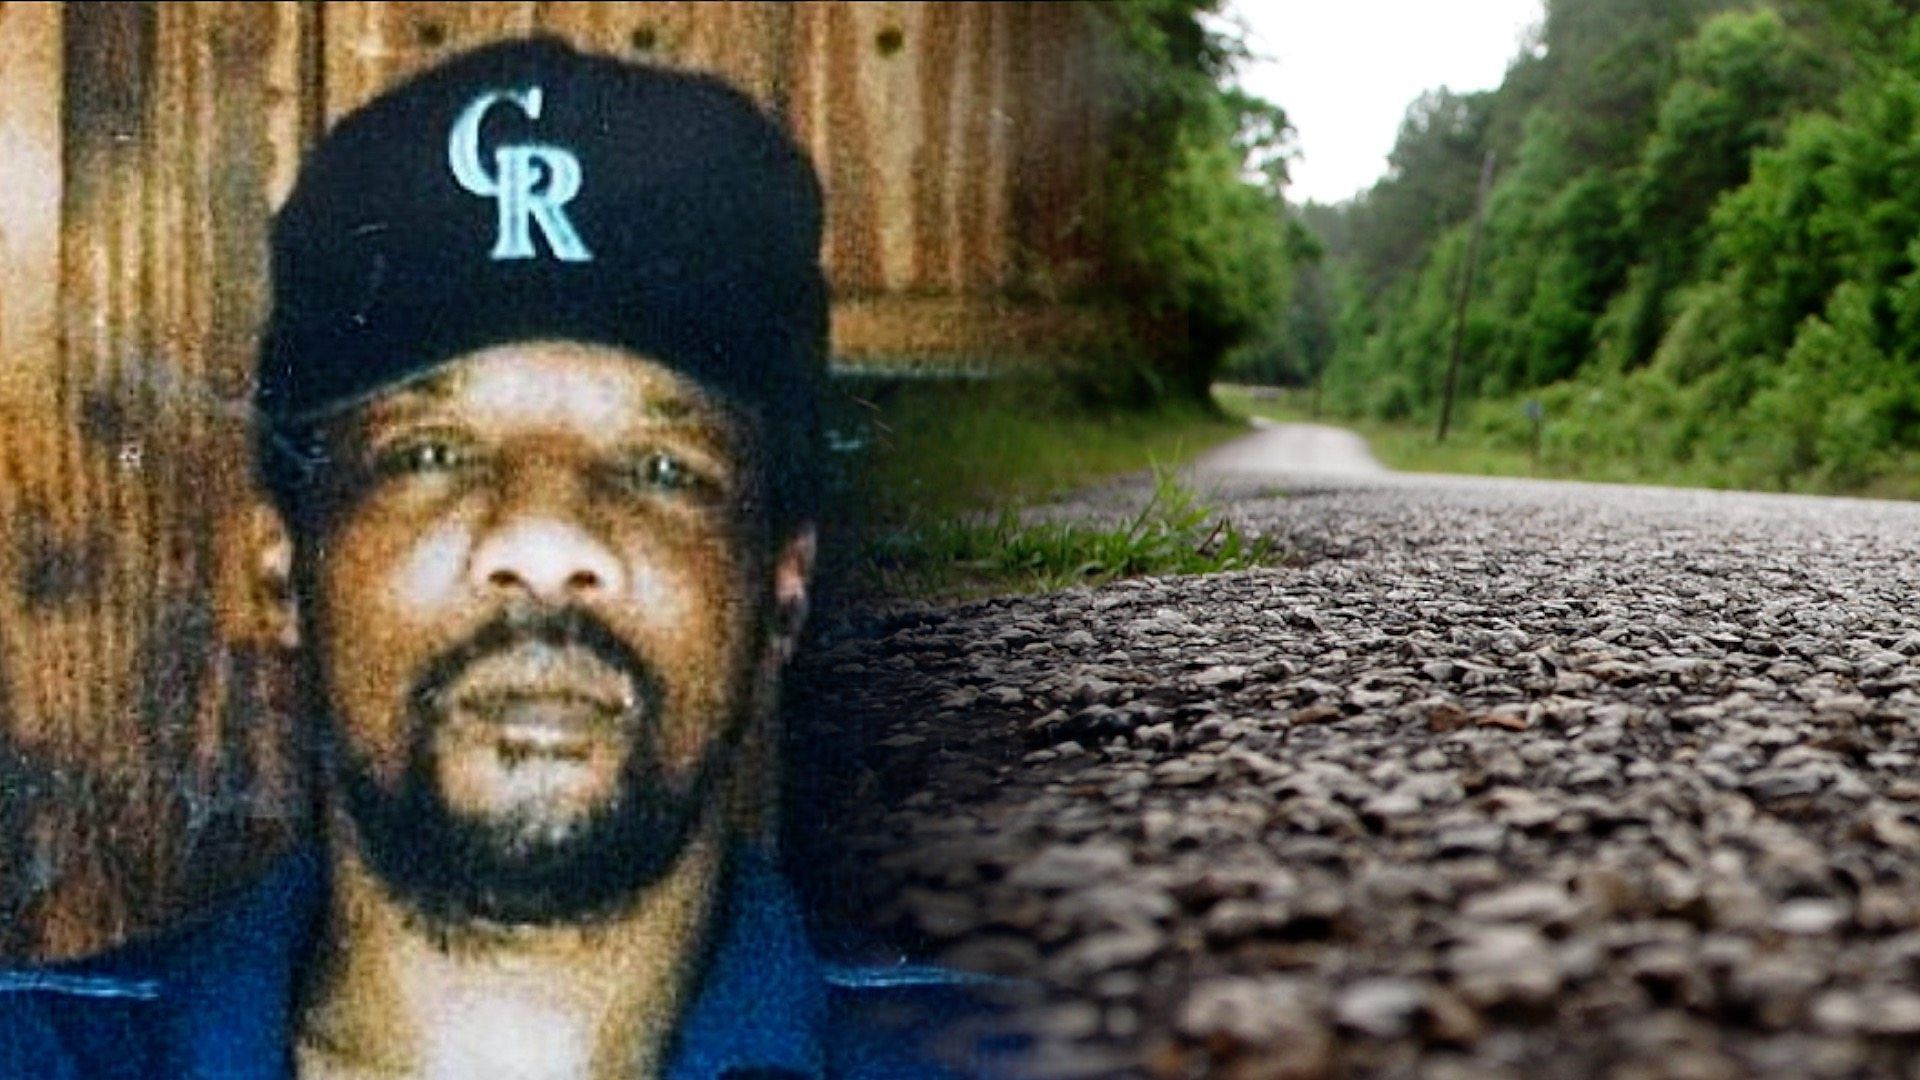 James Byrd Jr. was brutally murdered in a hate crime over two decades ago in 1998 (Image via BBC)